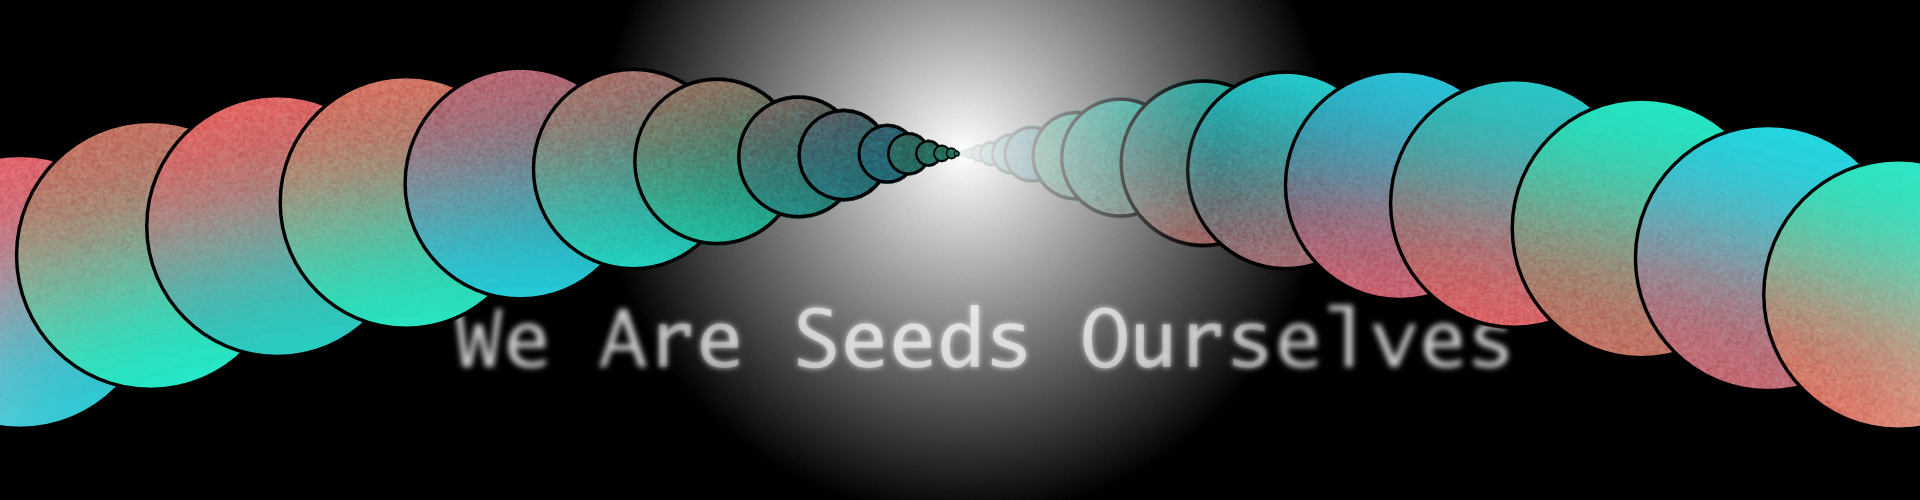 We Are Seeds Ourselves